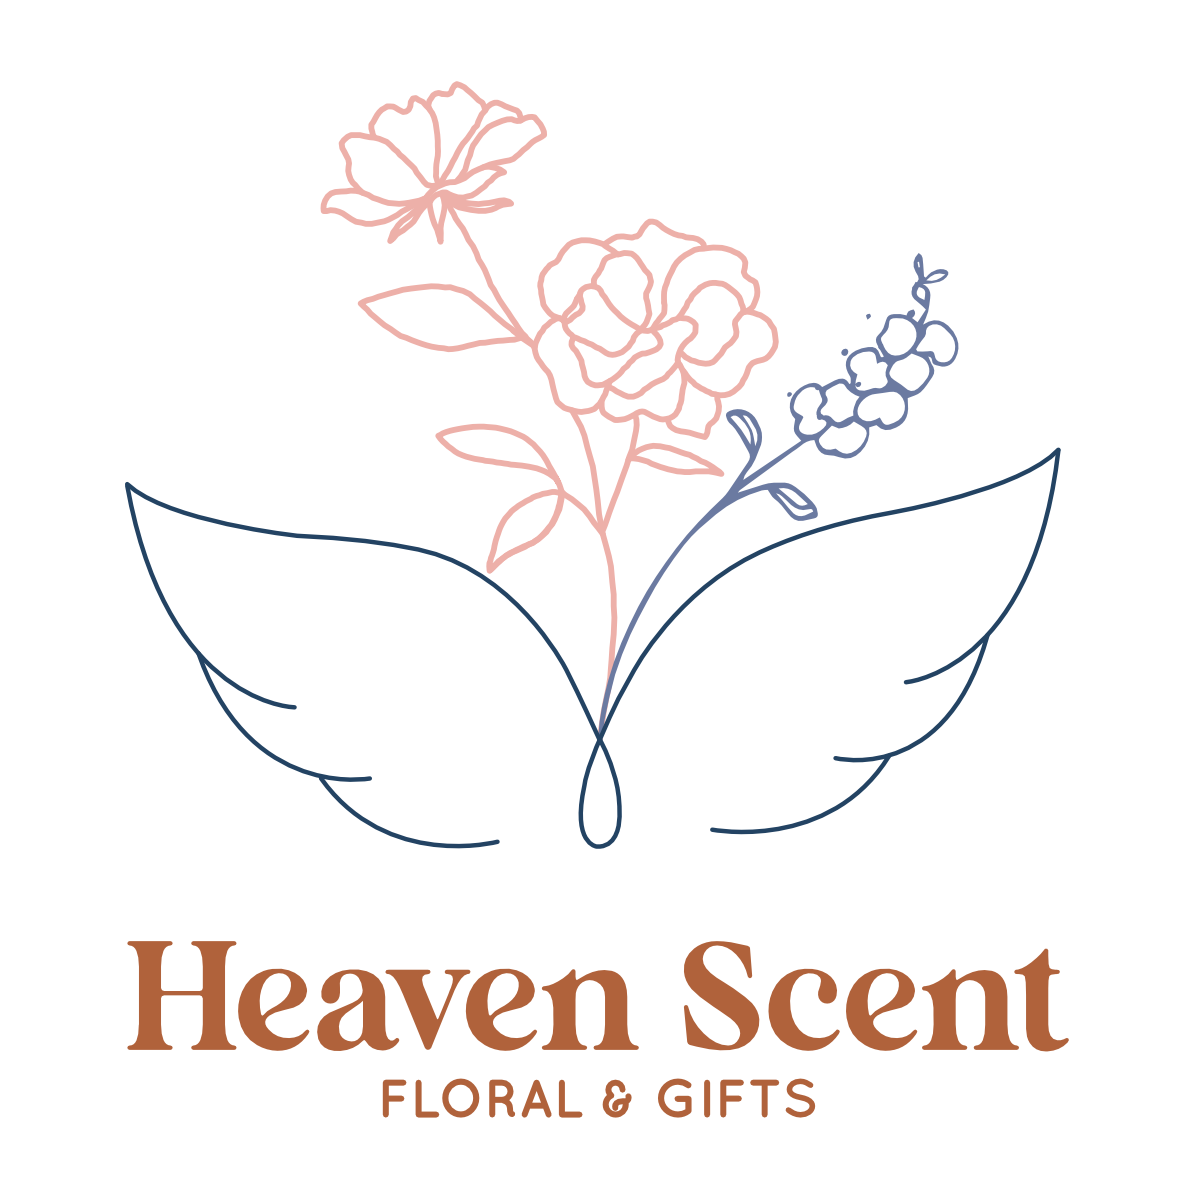 Heaven Scent Floral and Gifts 423 W Park St, Anaconda Montana 59711